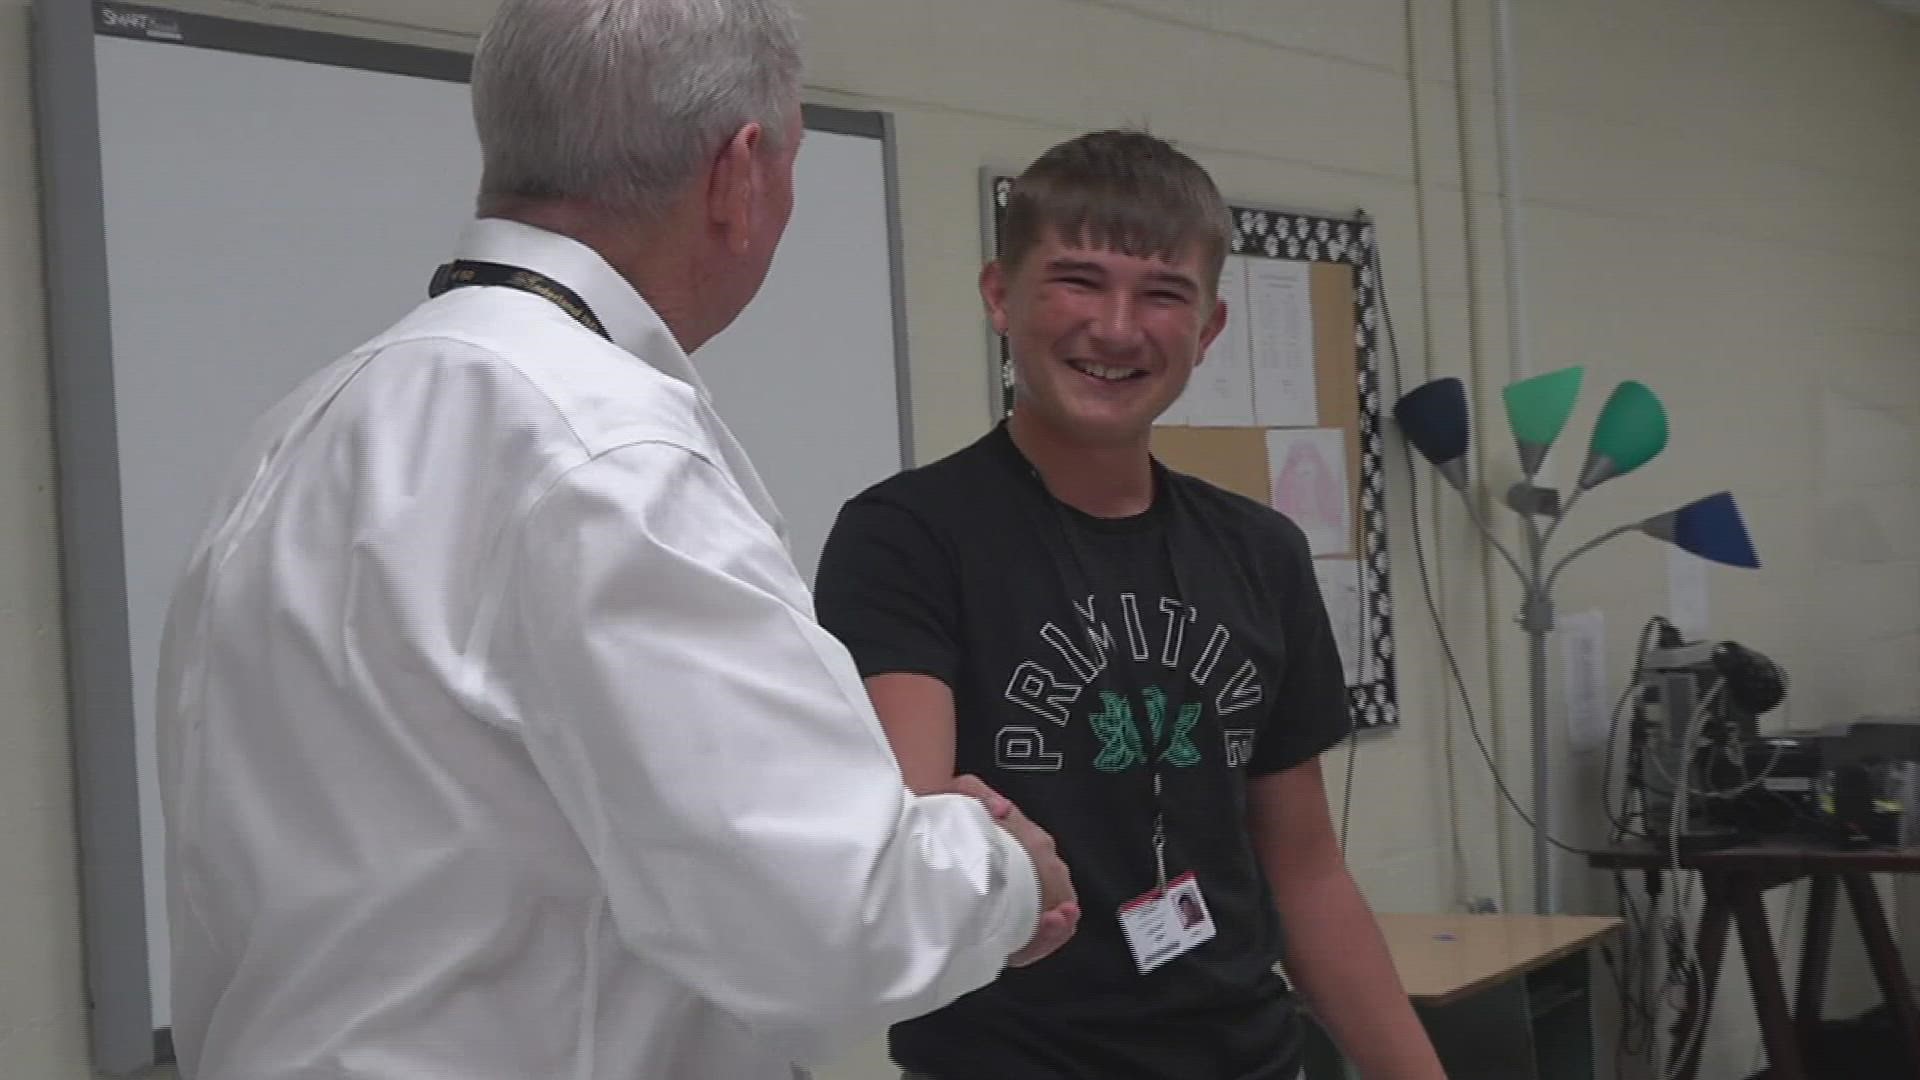 Superintendent Dr. Stuart Kirschnick awarded Jackson Winfree a hat and t-shirt for being the first student to arrive on the first day of school.